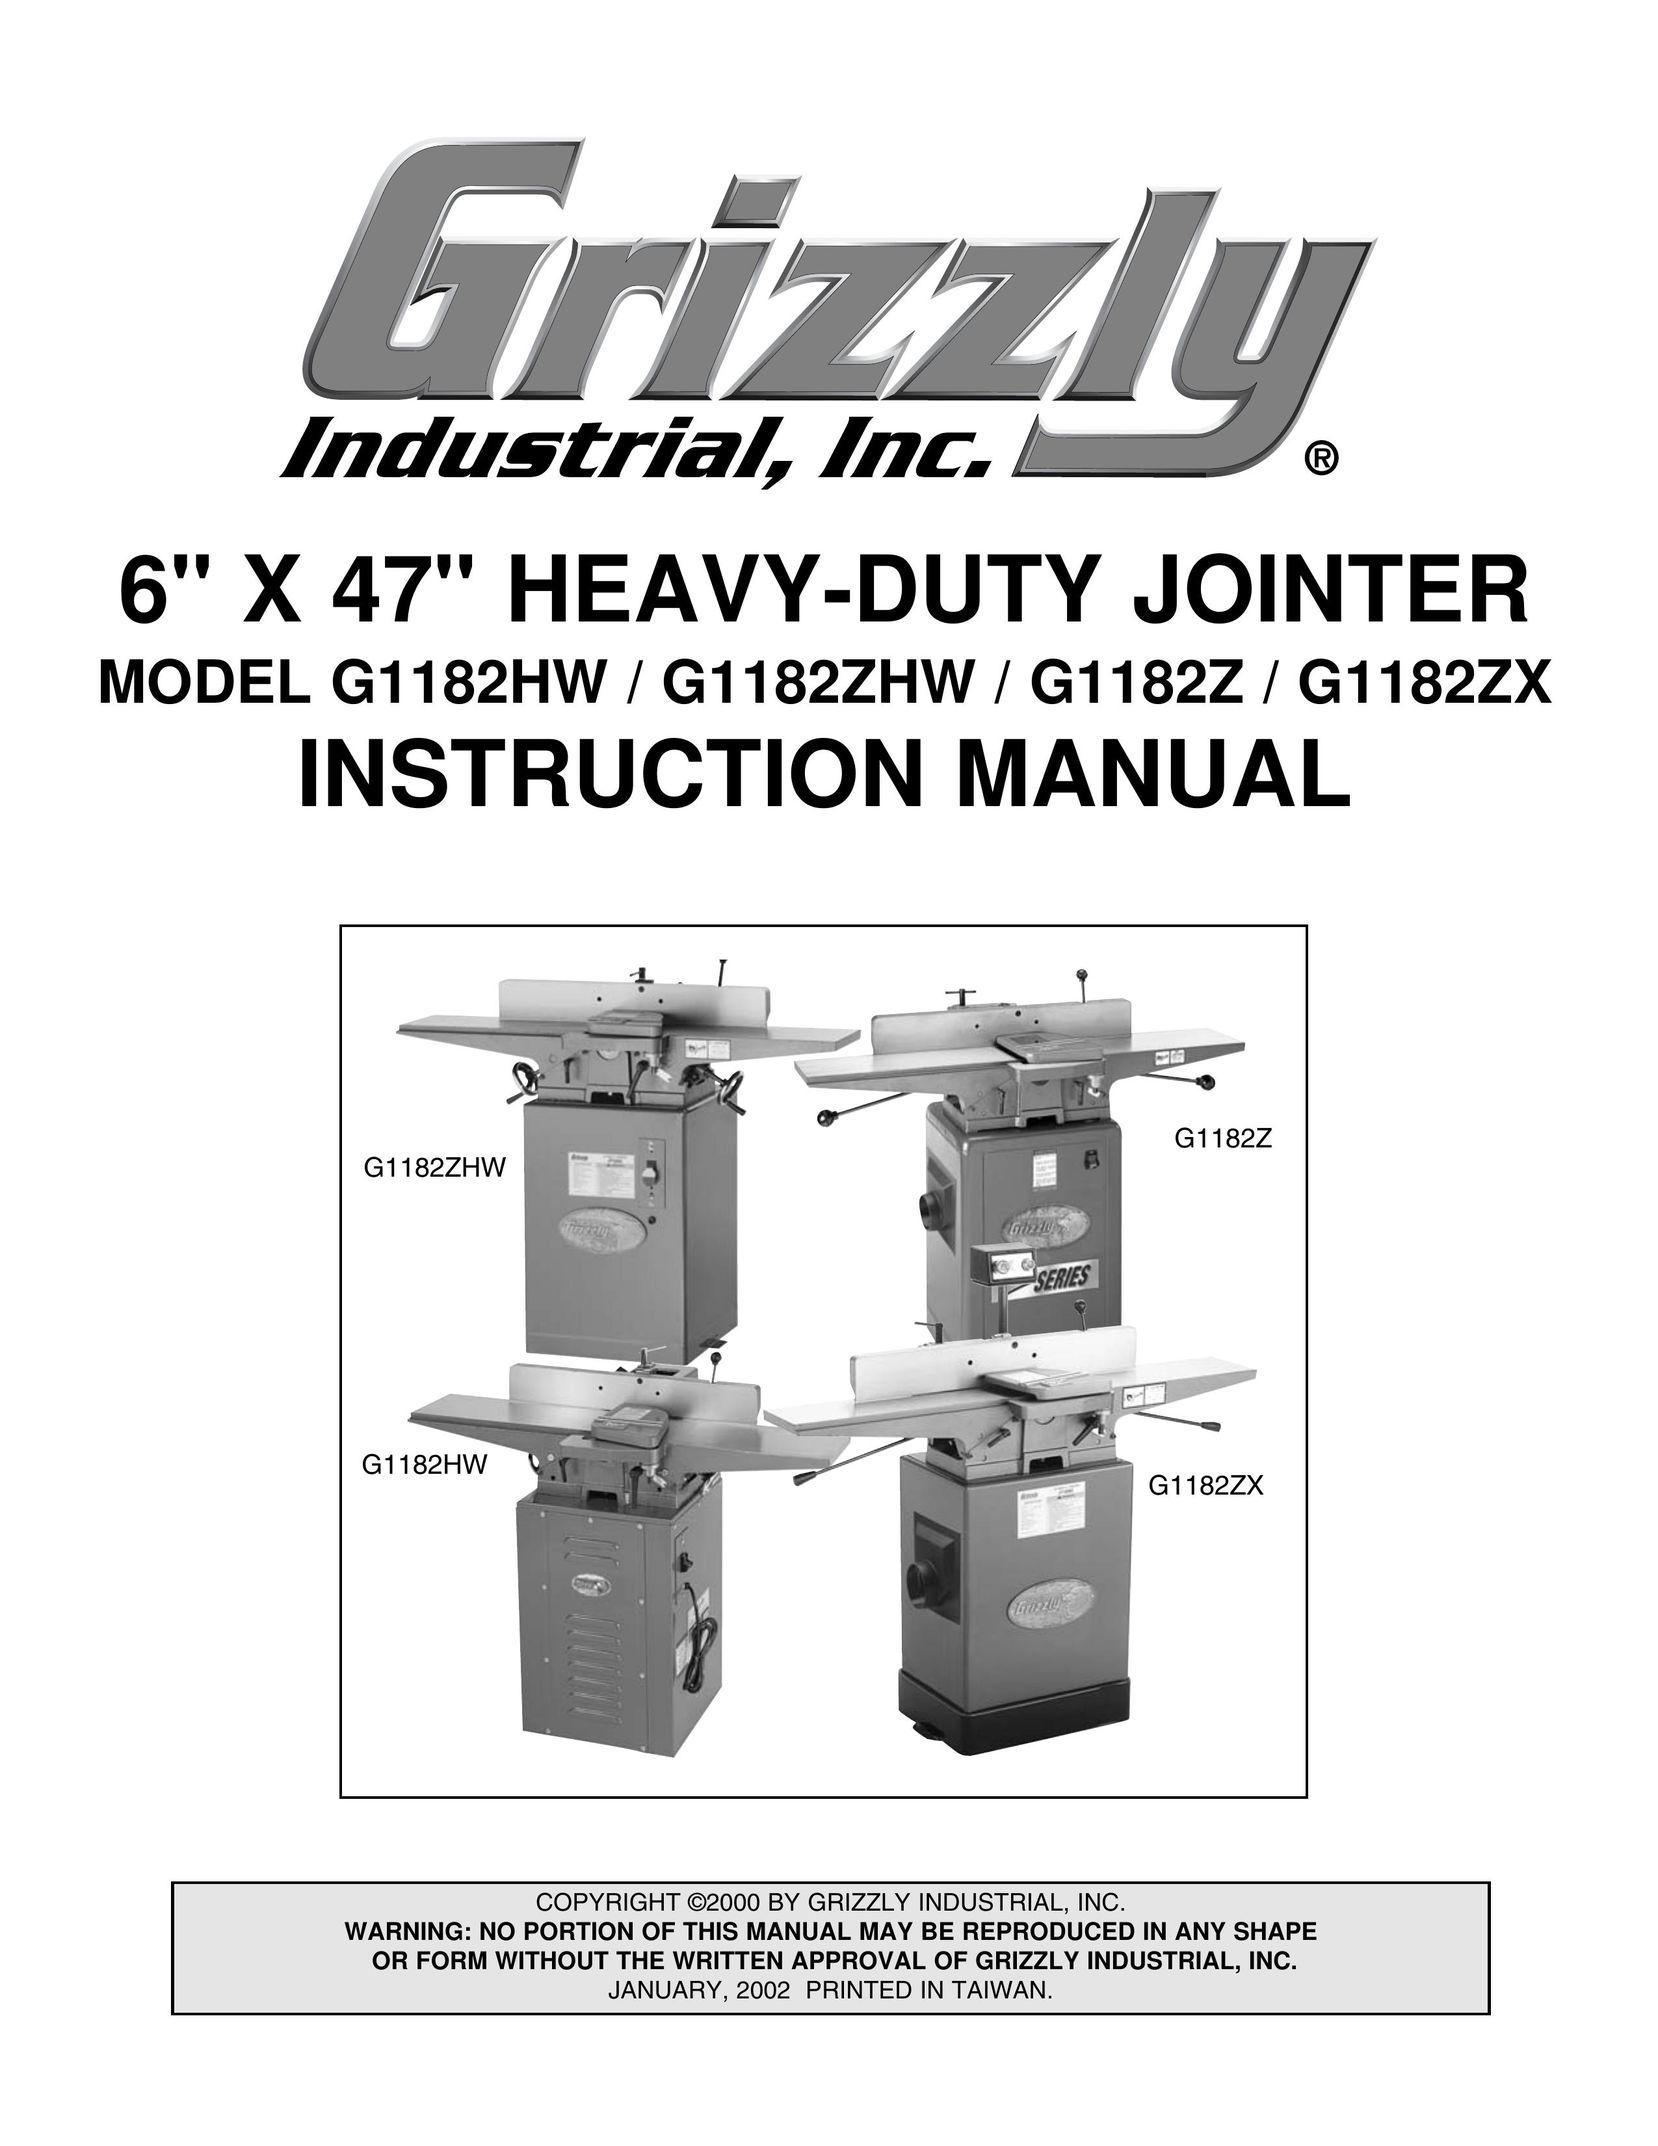 Grizzly G1182HW Biscuit Joiner User Manual (Page 1)